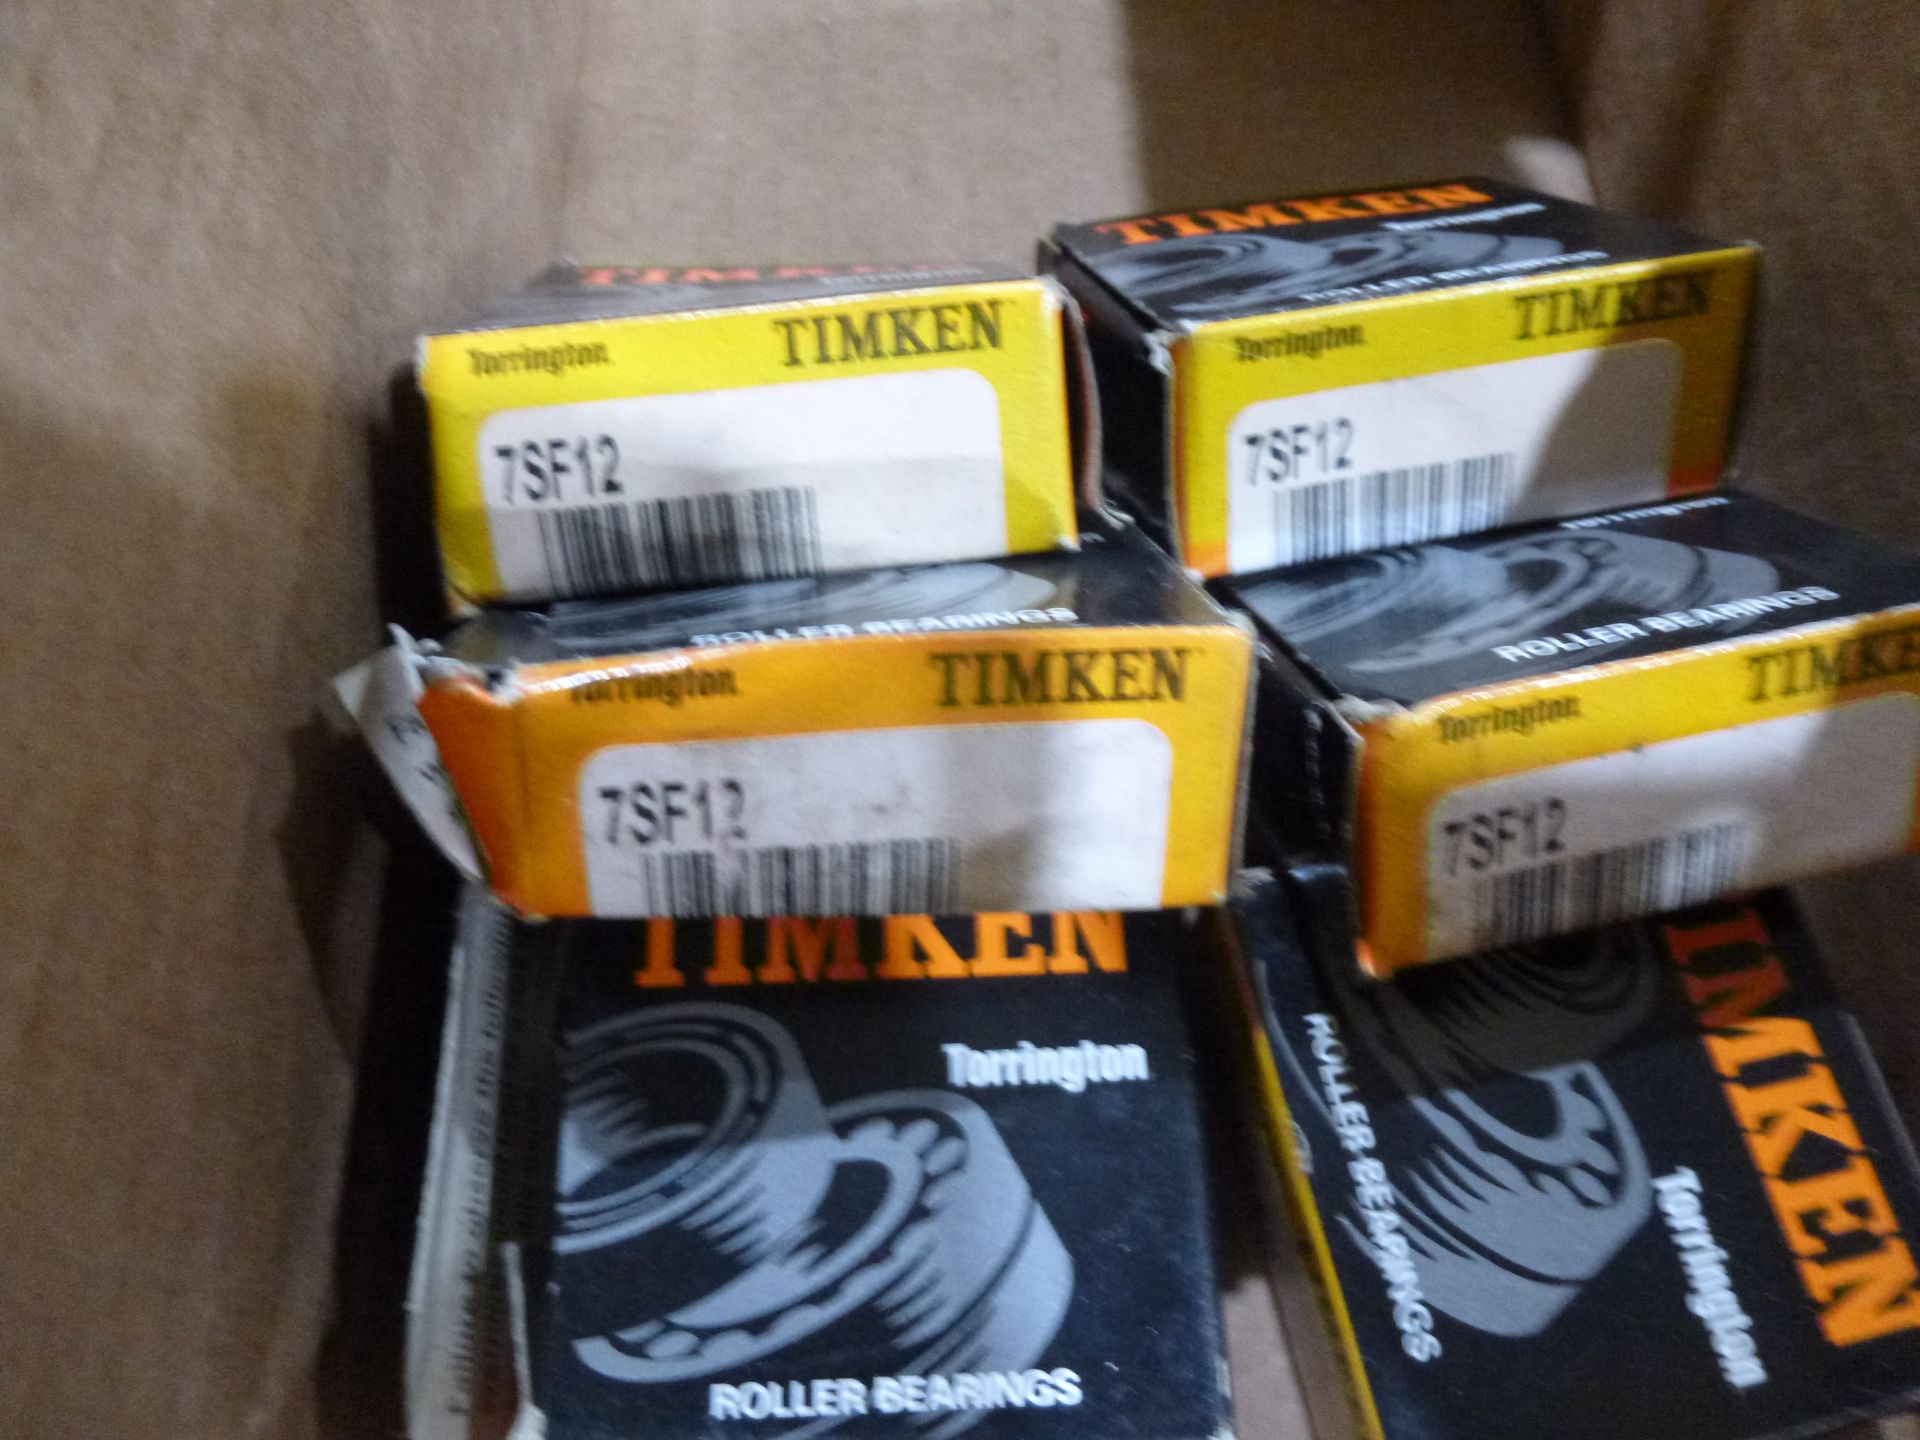 Qty 6 Timken bearing 7SF12, as always with Brolyn LLC auctions, all lots can be picked up from - Image 2 of 2